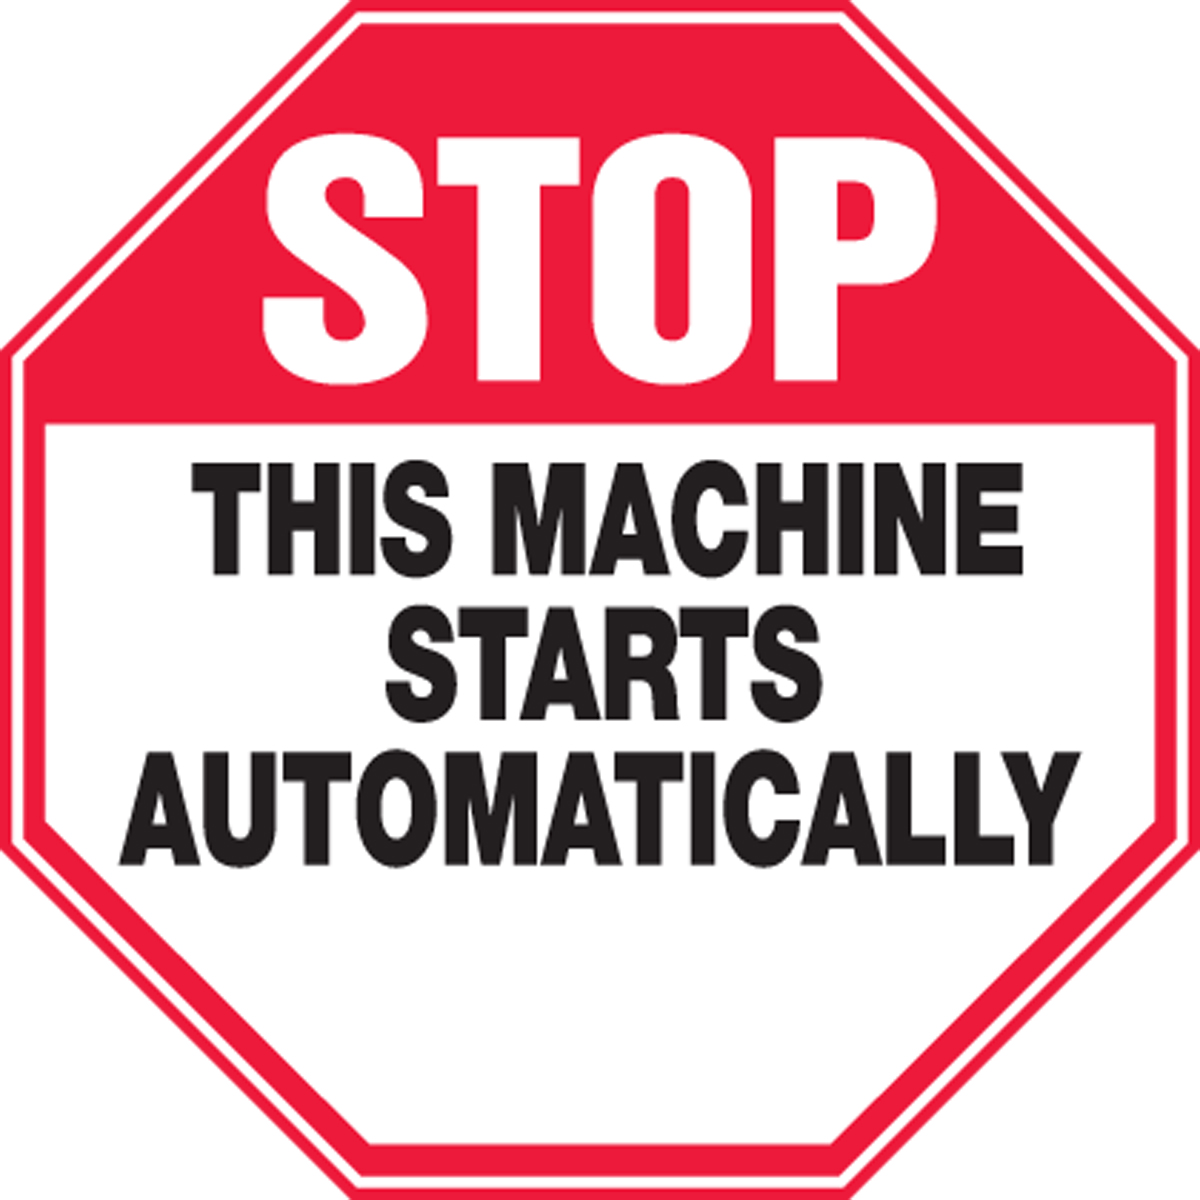 STOP THIS MACHINE STARTS AUTOMATICALLY